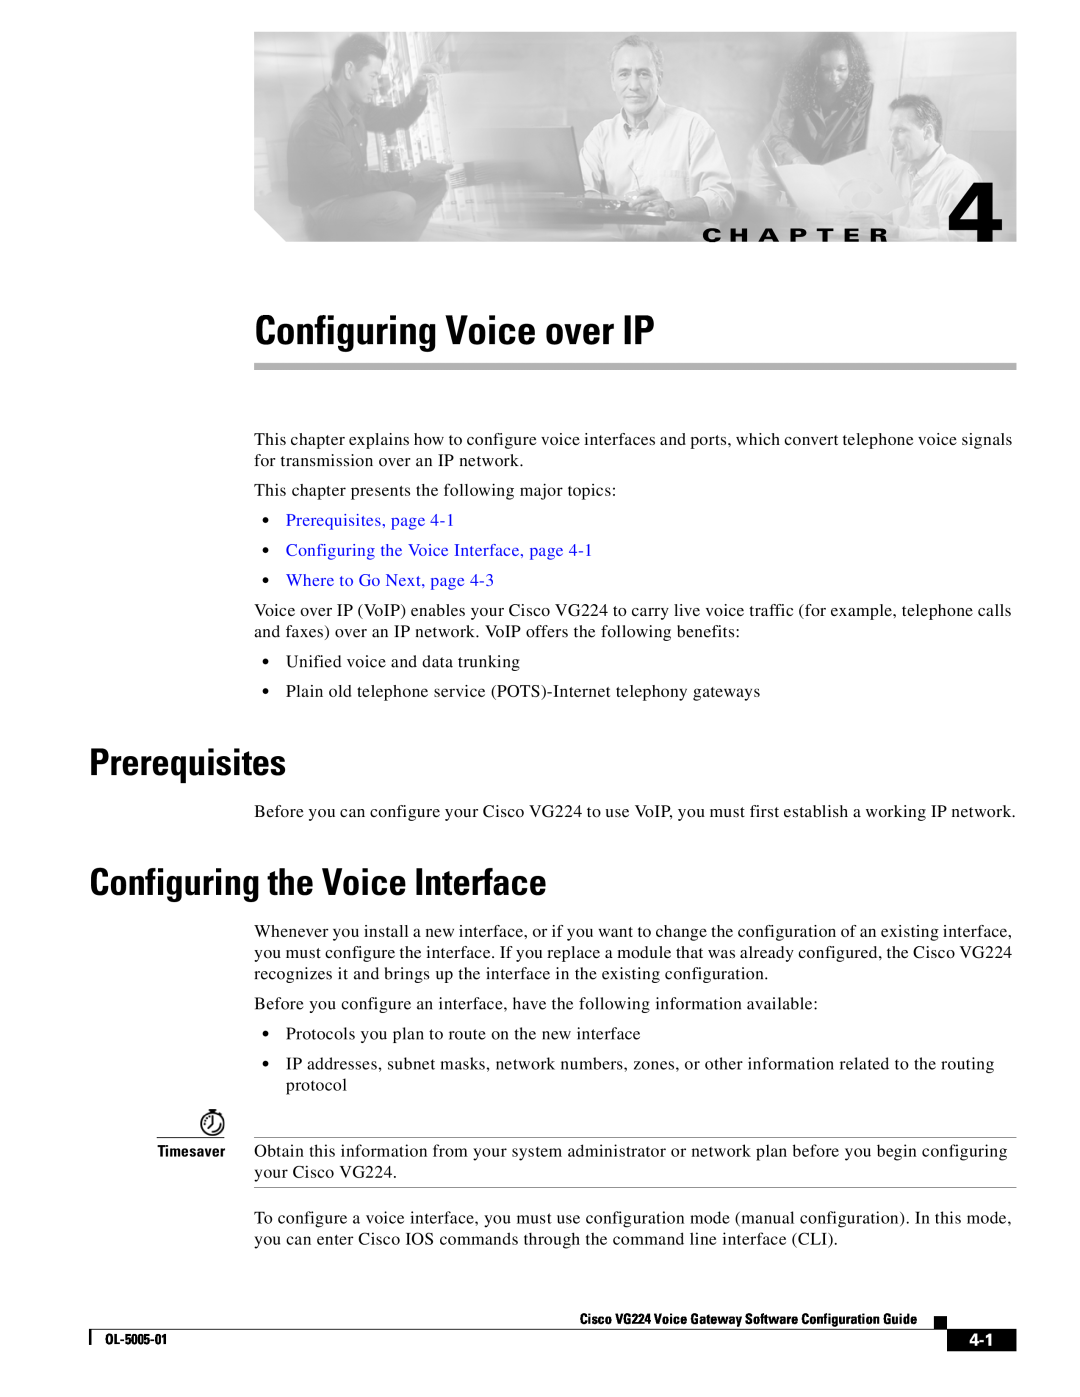 Cisco Systems VG224 manual Configuring Voice over IP, Prerequisites, Configuring the Voice Interface, C H A P T E R 